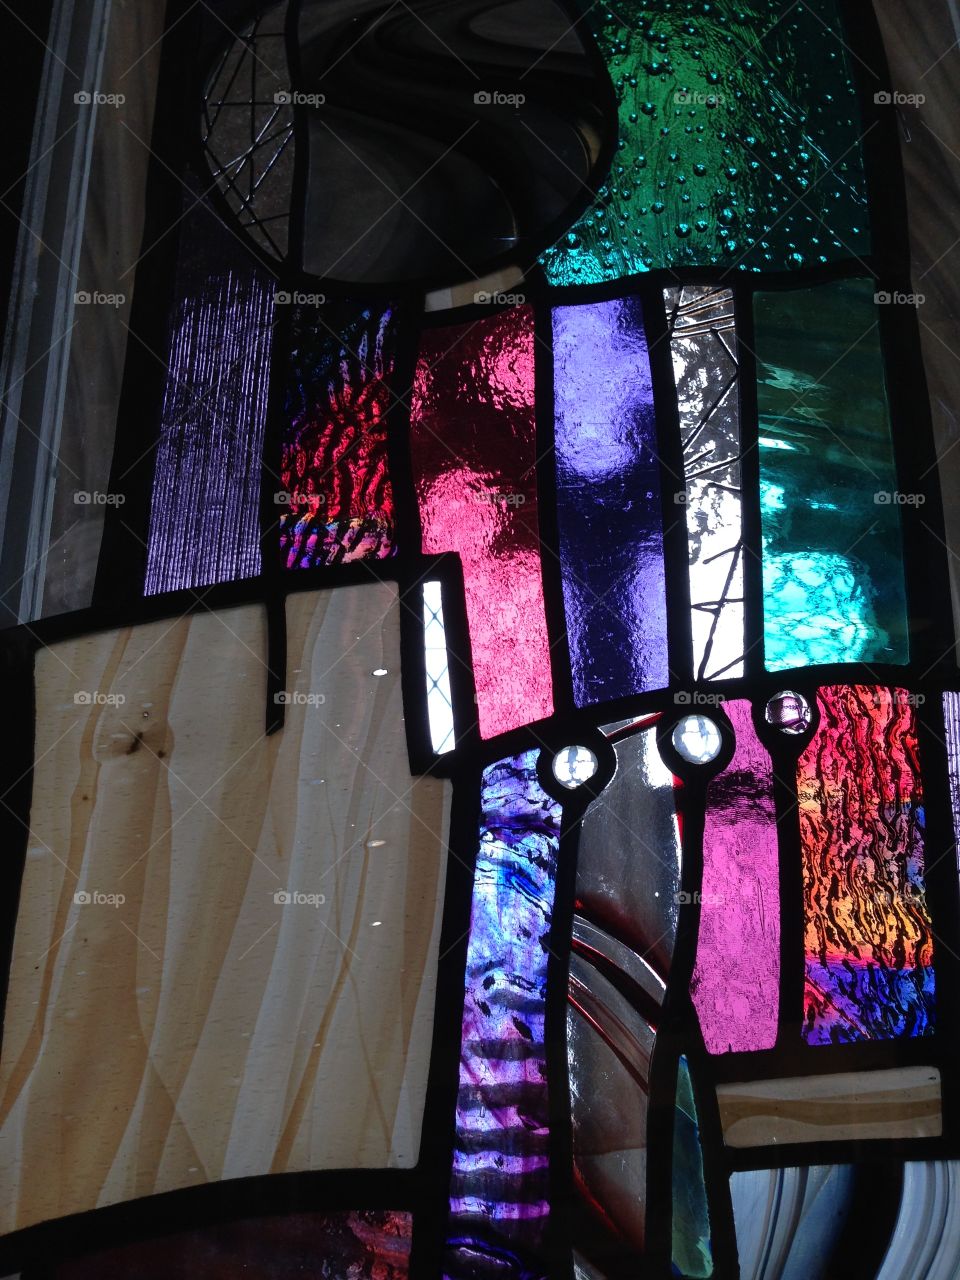 Stained glass 2